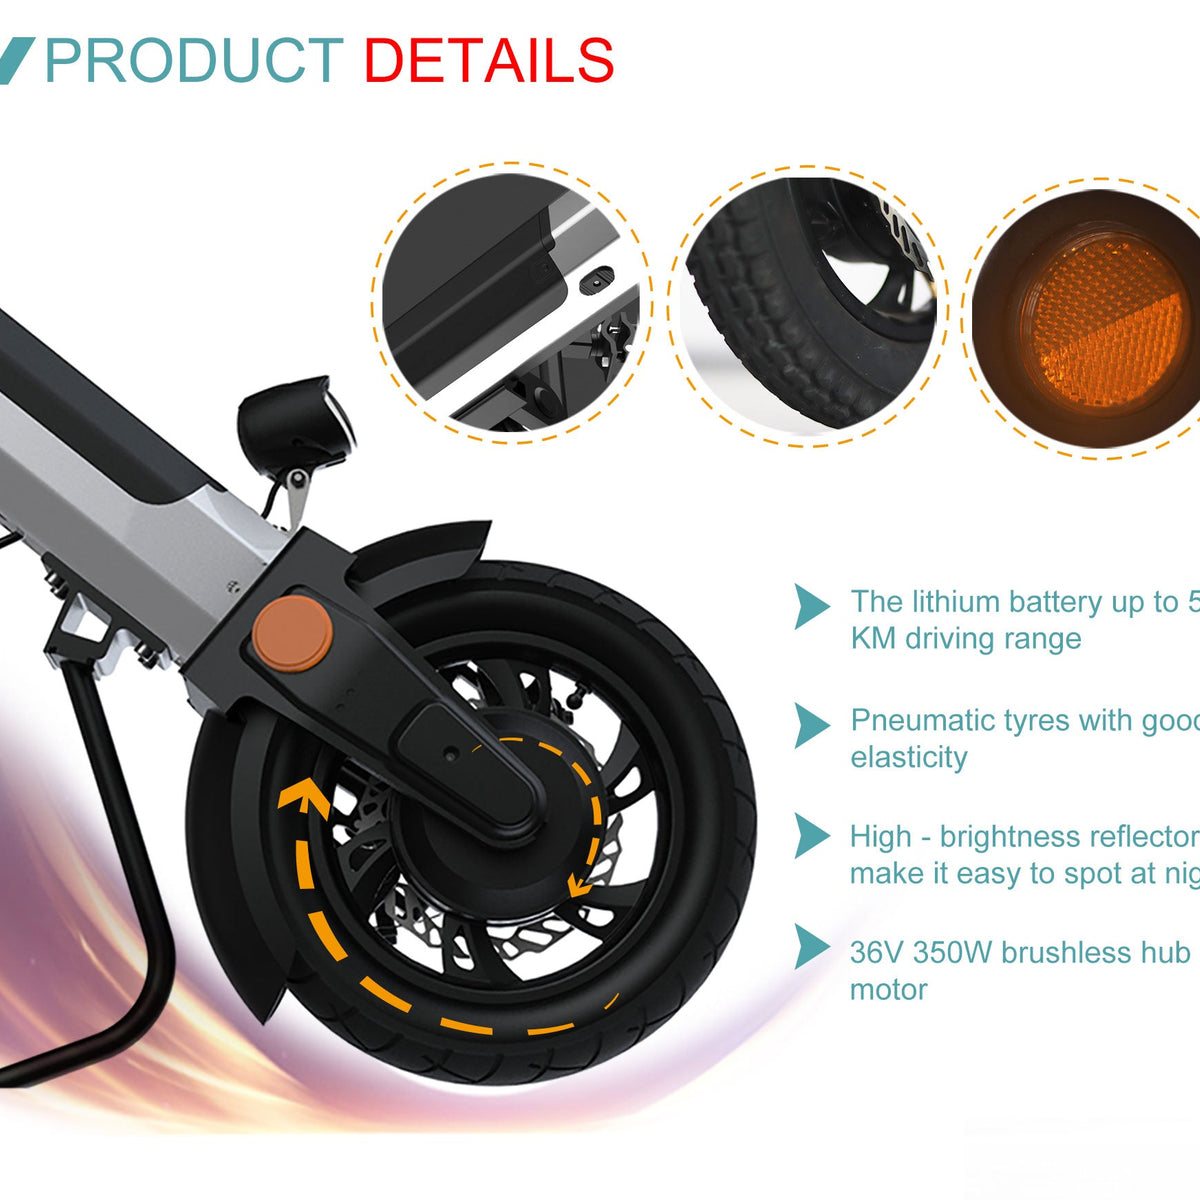 Commuter Electric Handbike Handcycle for Manual Wheelchairs